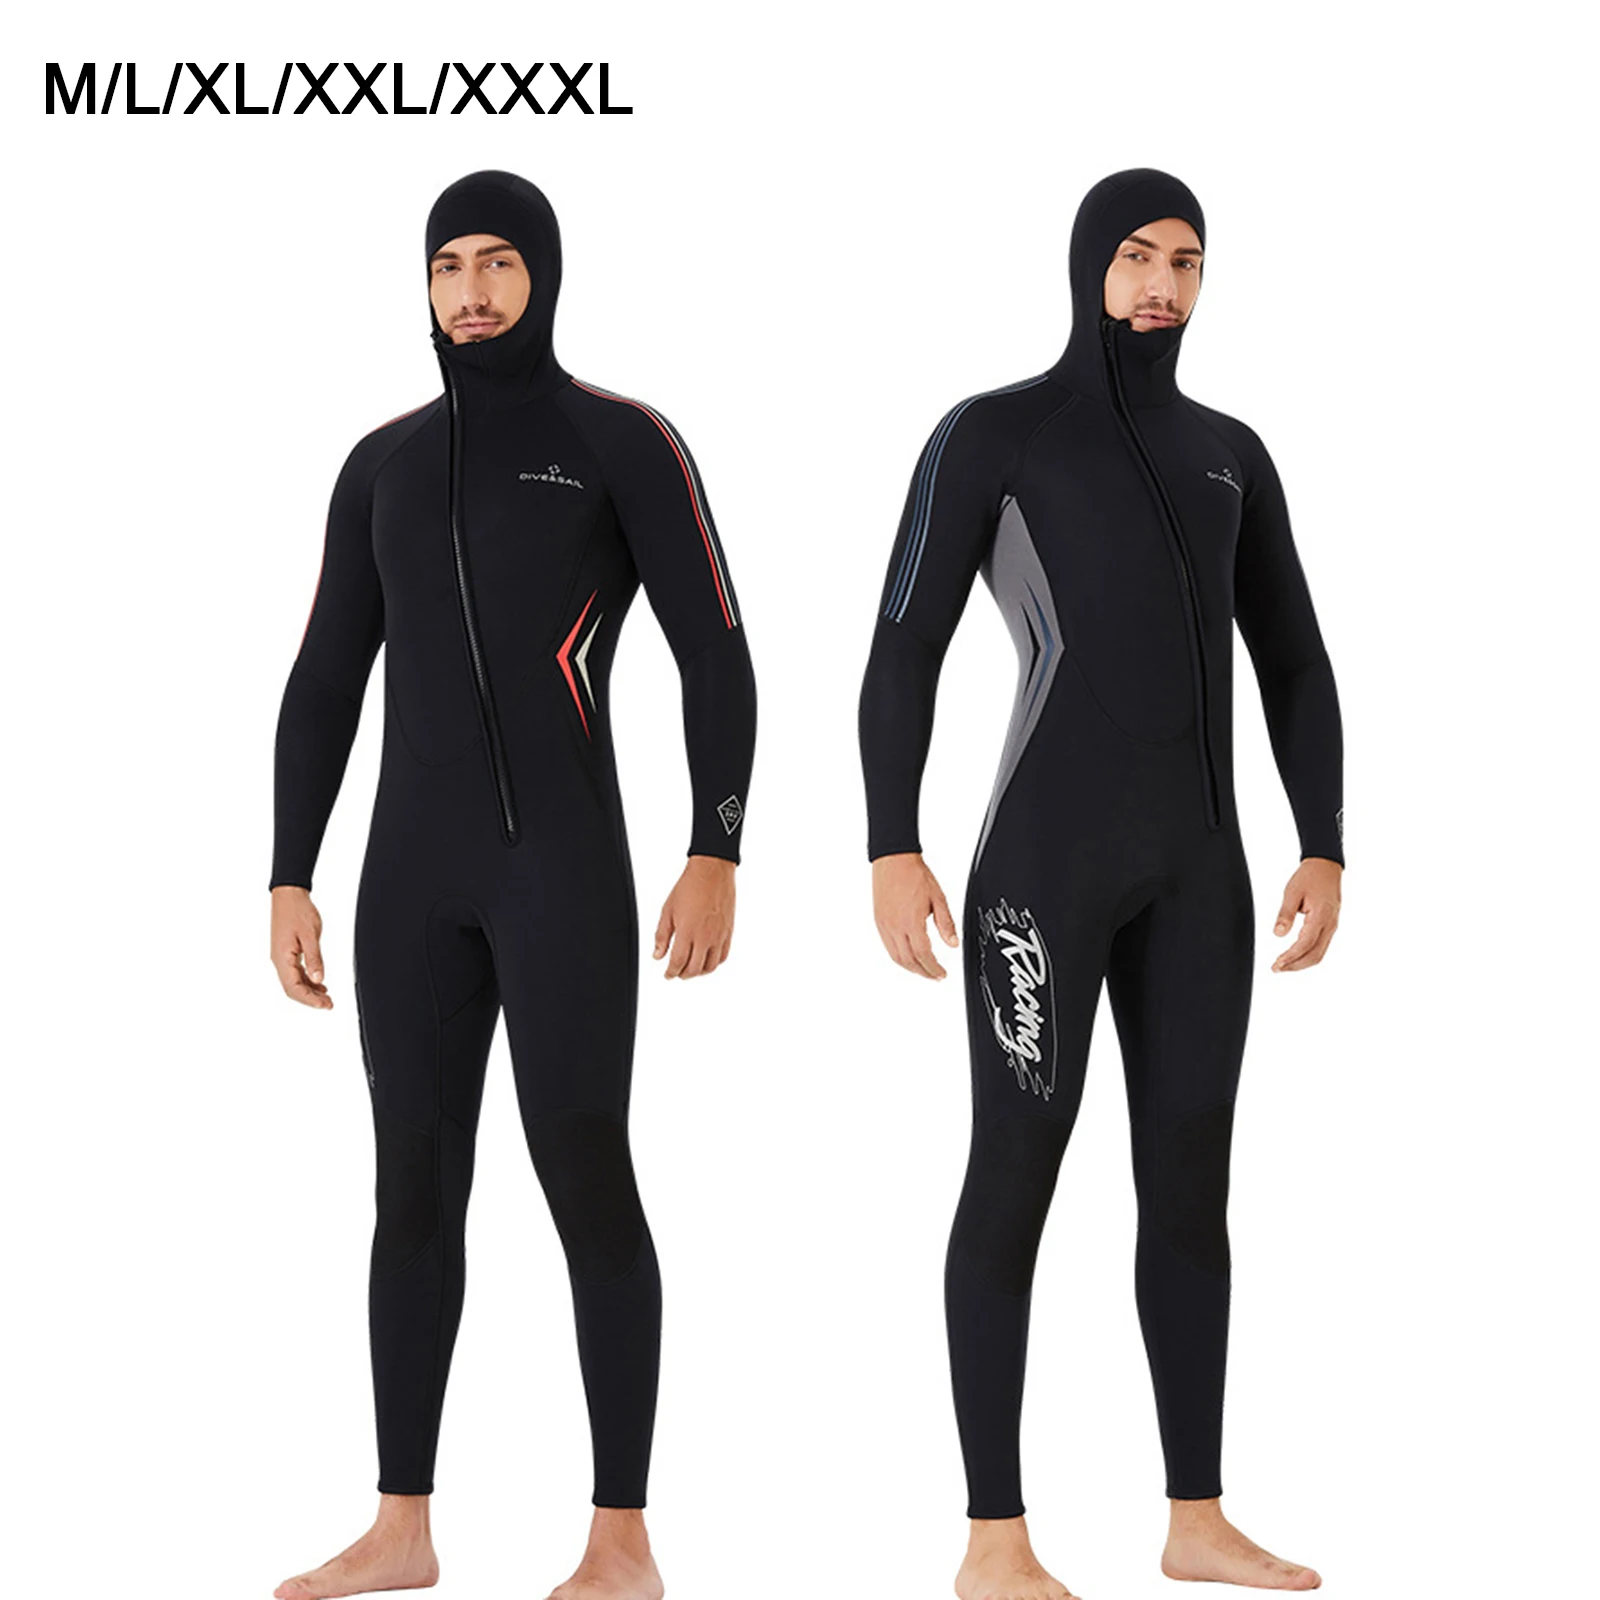 Ultra-thin WetSuit Full Body Super stretch Diving Suit Swim Surf Snorkeling USA 